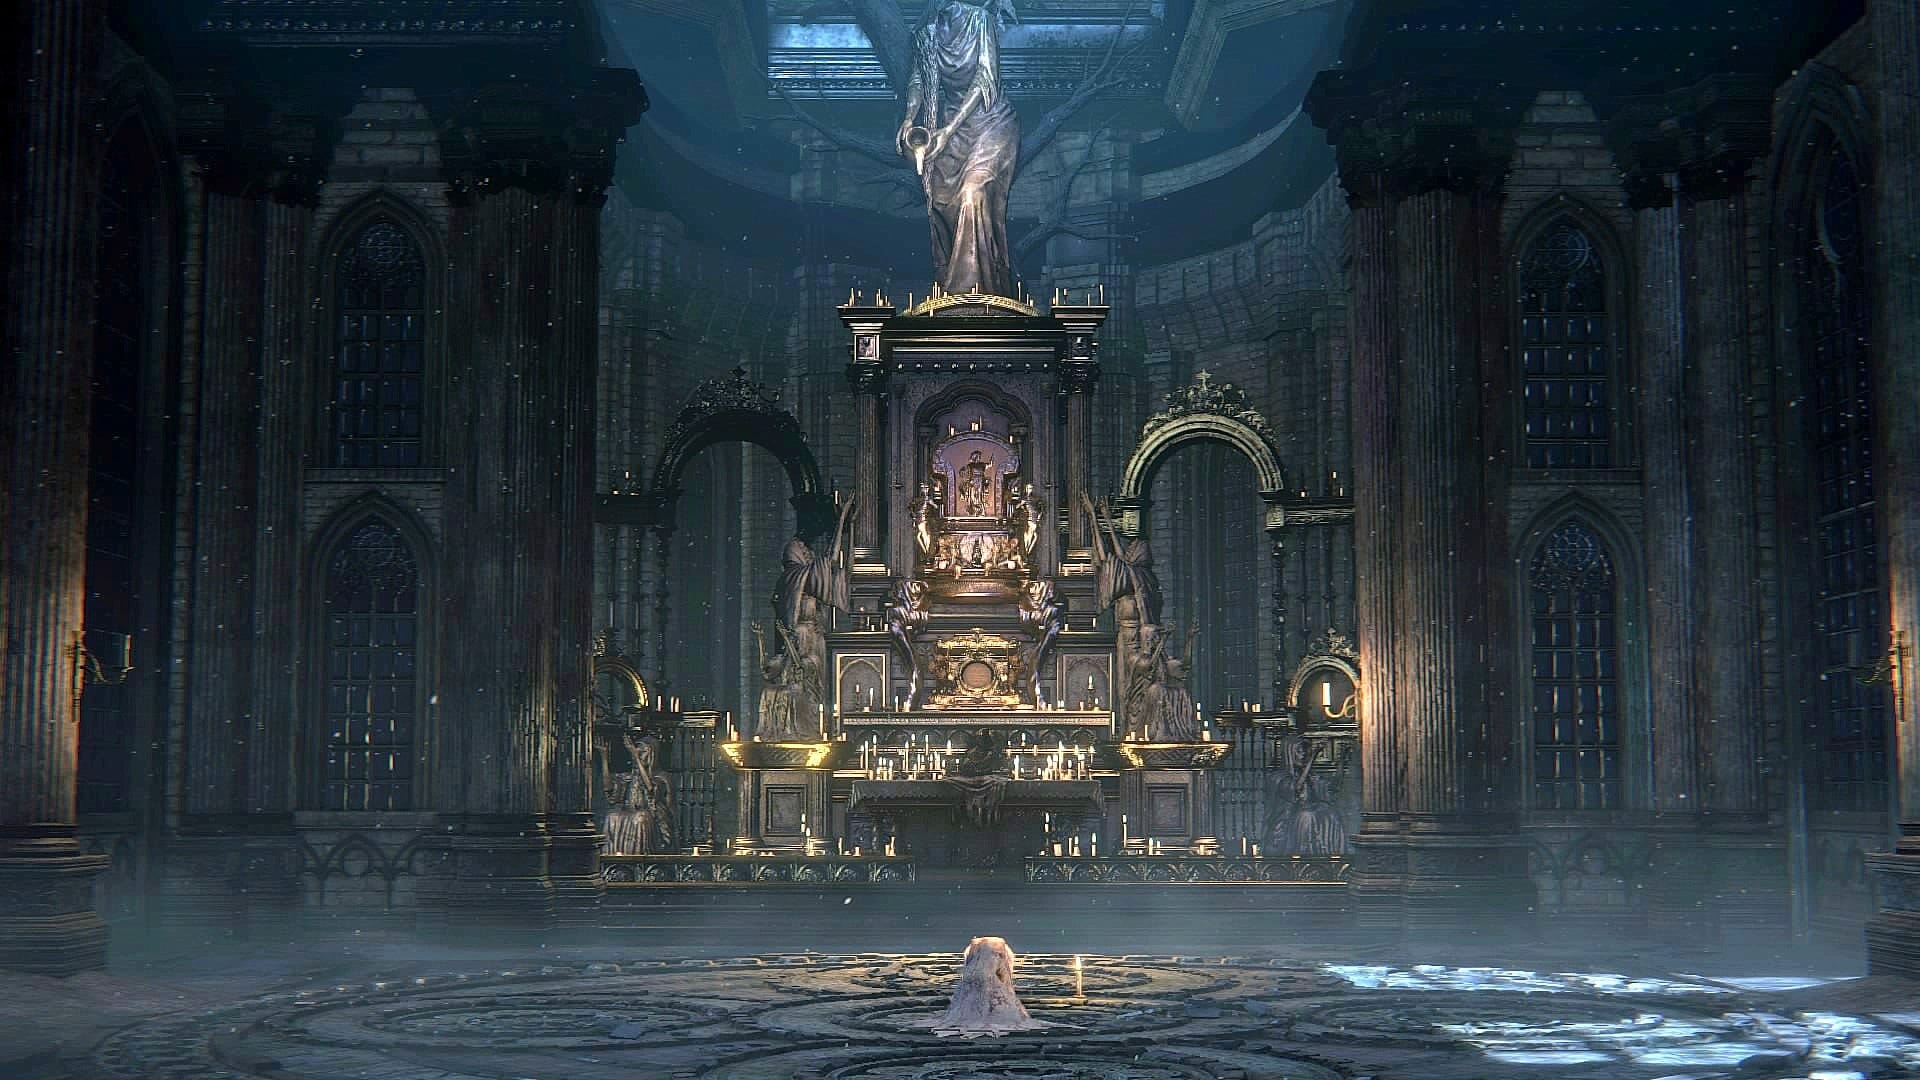 Cathedral Ward from Bloodborne